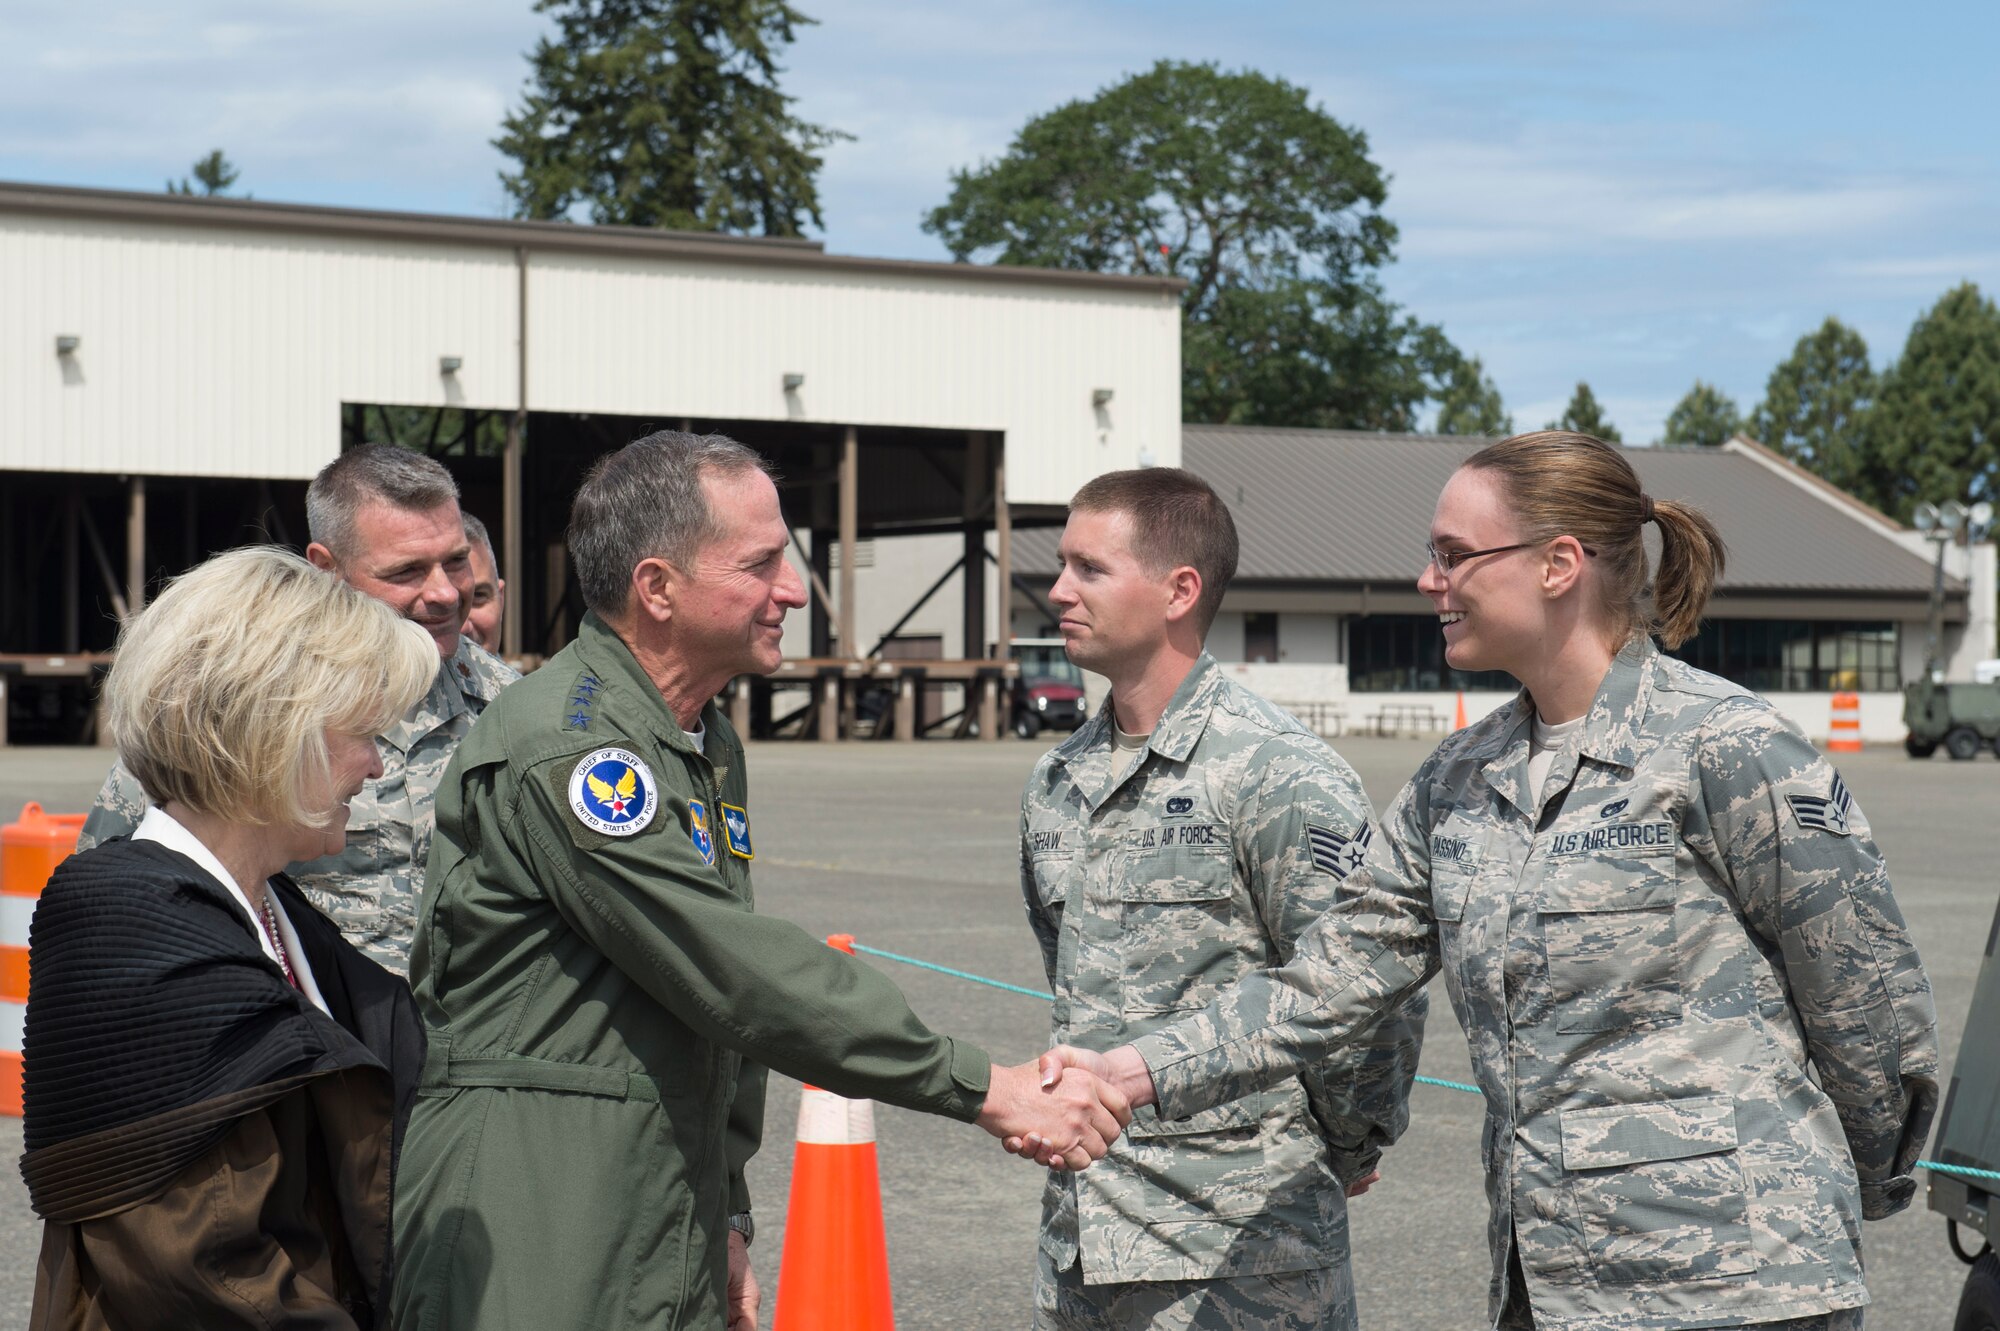 Gen David Goldfein, Chief of Staff of the Air Force, greets members of the 62nd Aerial Port Squadron (APS), June 5, 2018, at Joint Base Lewis-McChord, Wash. Goldfein and the APS Airmen discussed the unique challenges and opportunities of working on a joint base. (U.S. Air Force photo by A1C Sara Hoerichs)